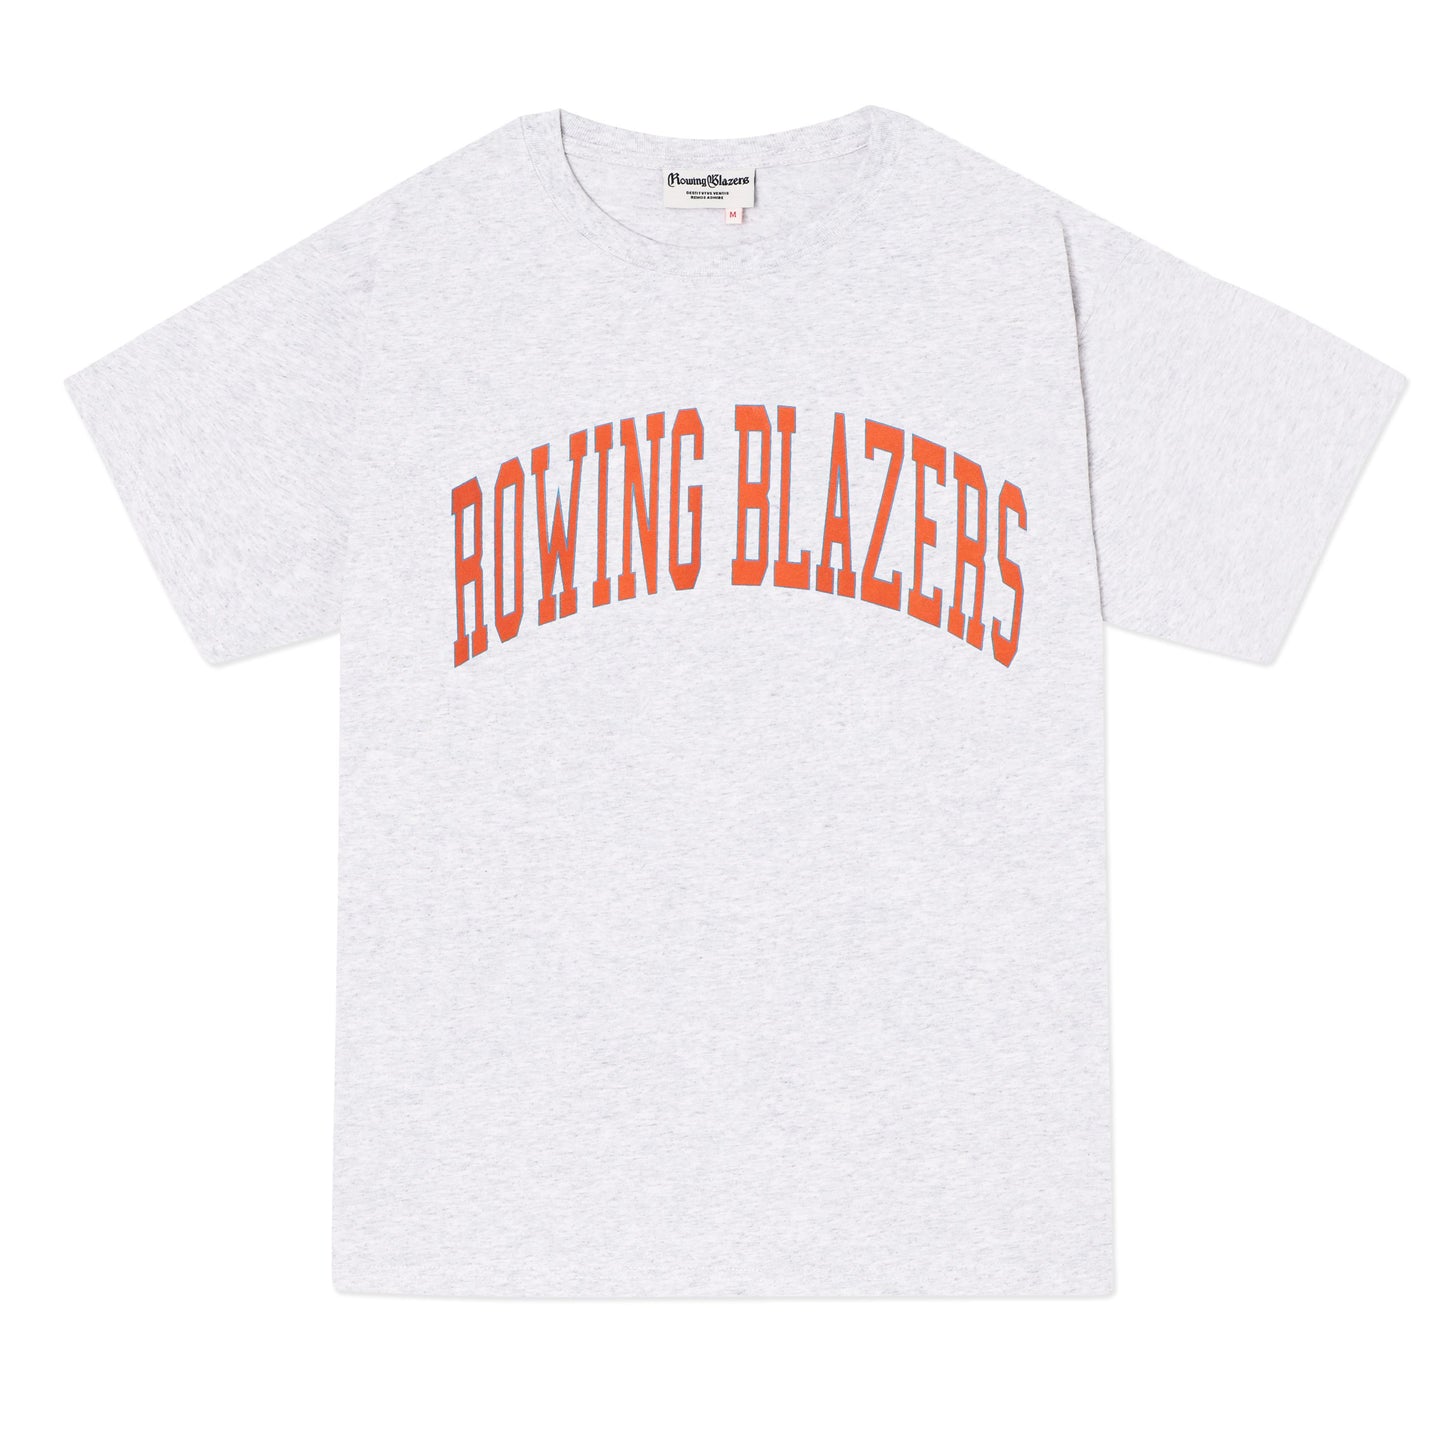 Classic light heather gray collegiate tee with "Rowing Blazers" across the front in orange.